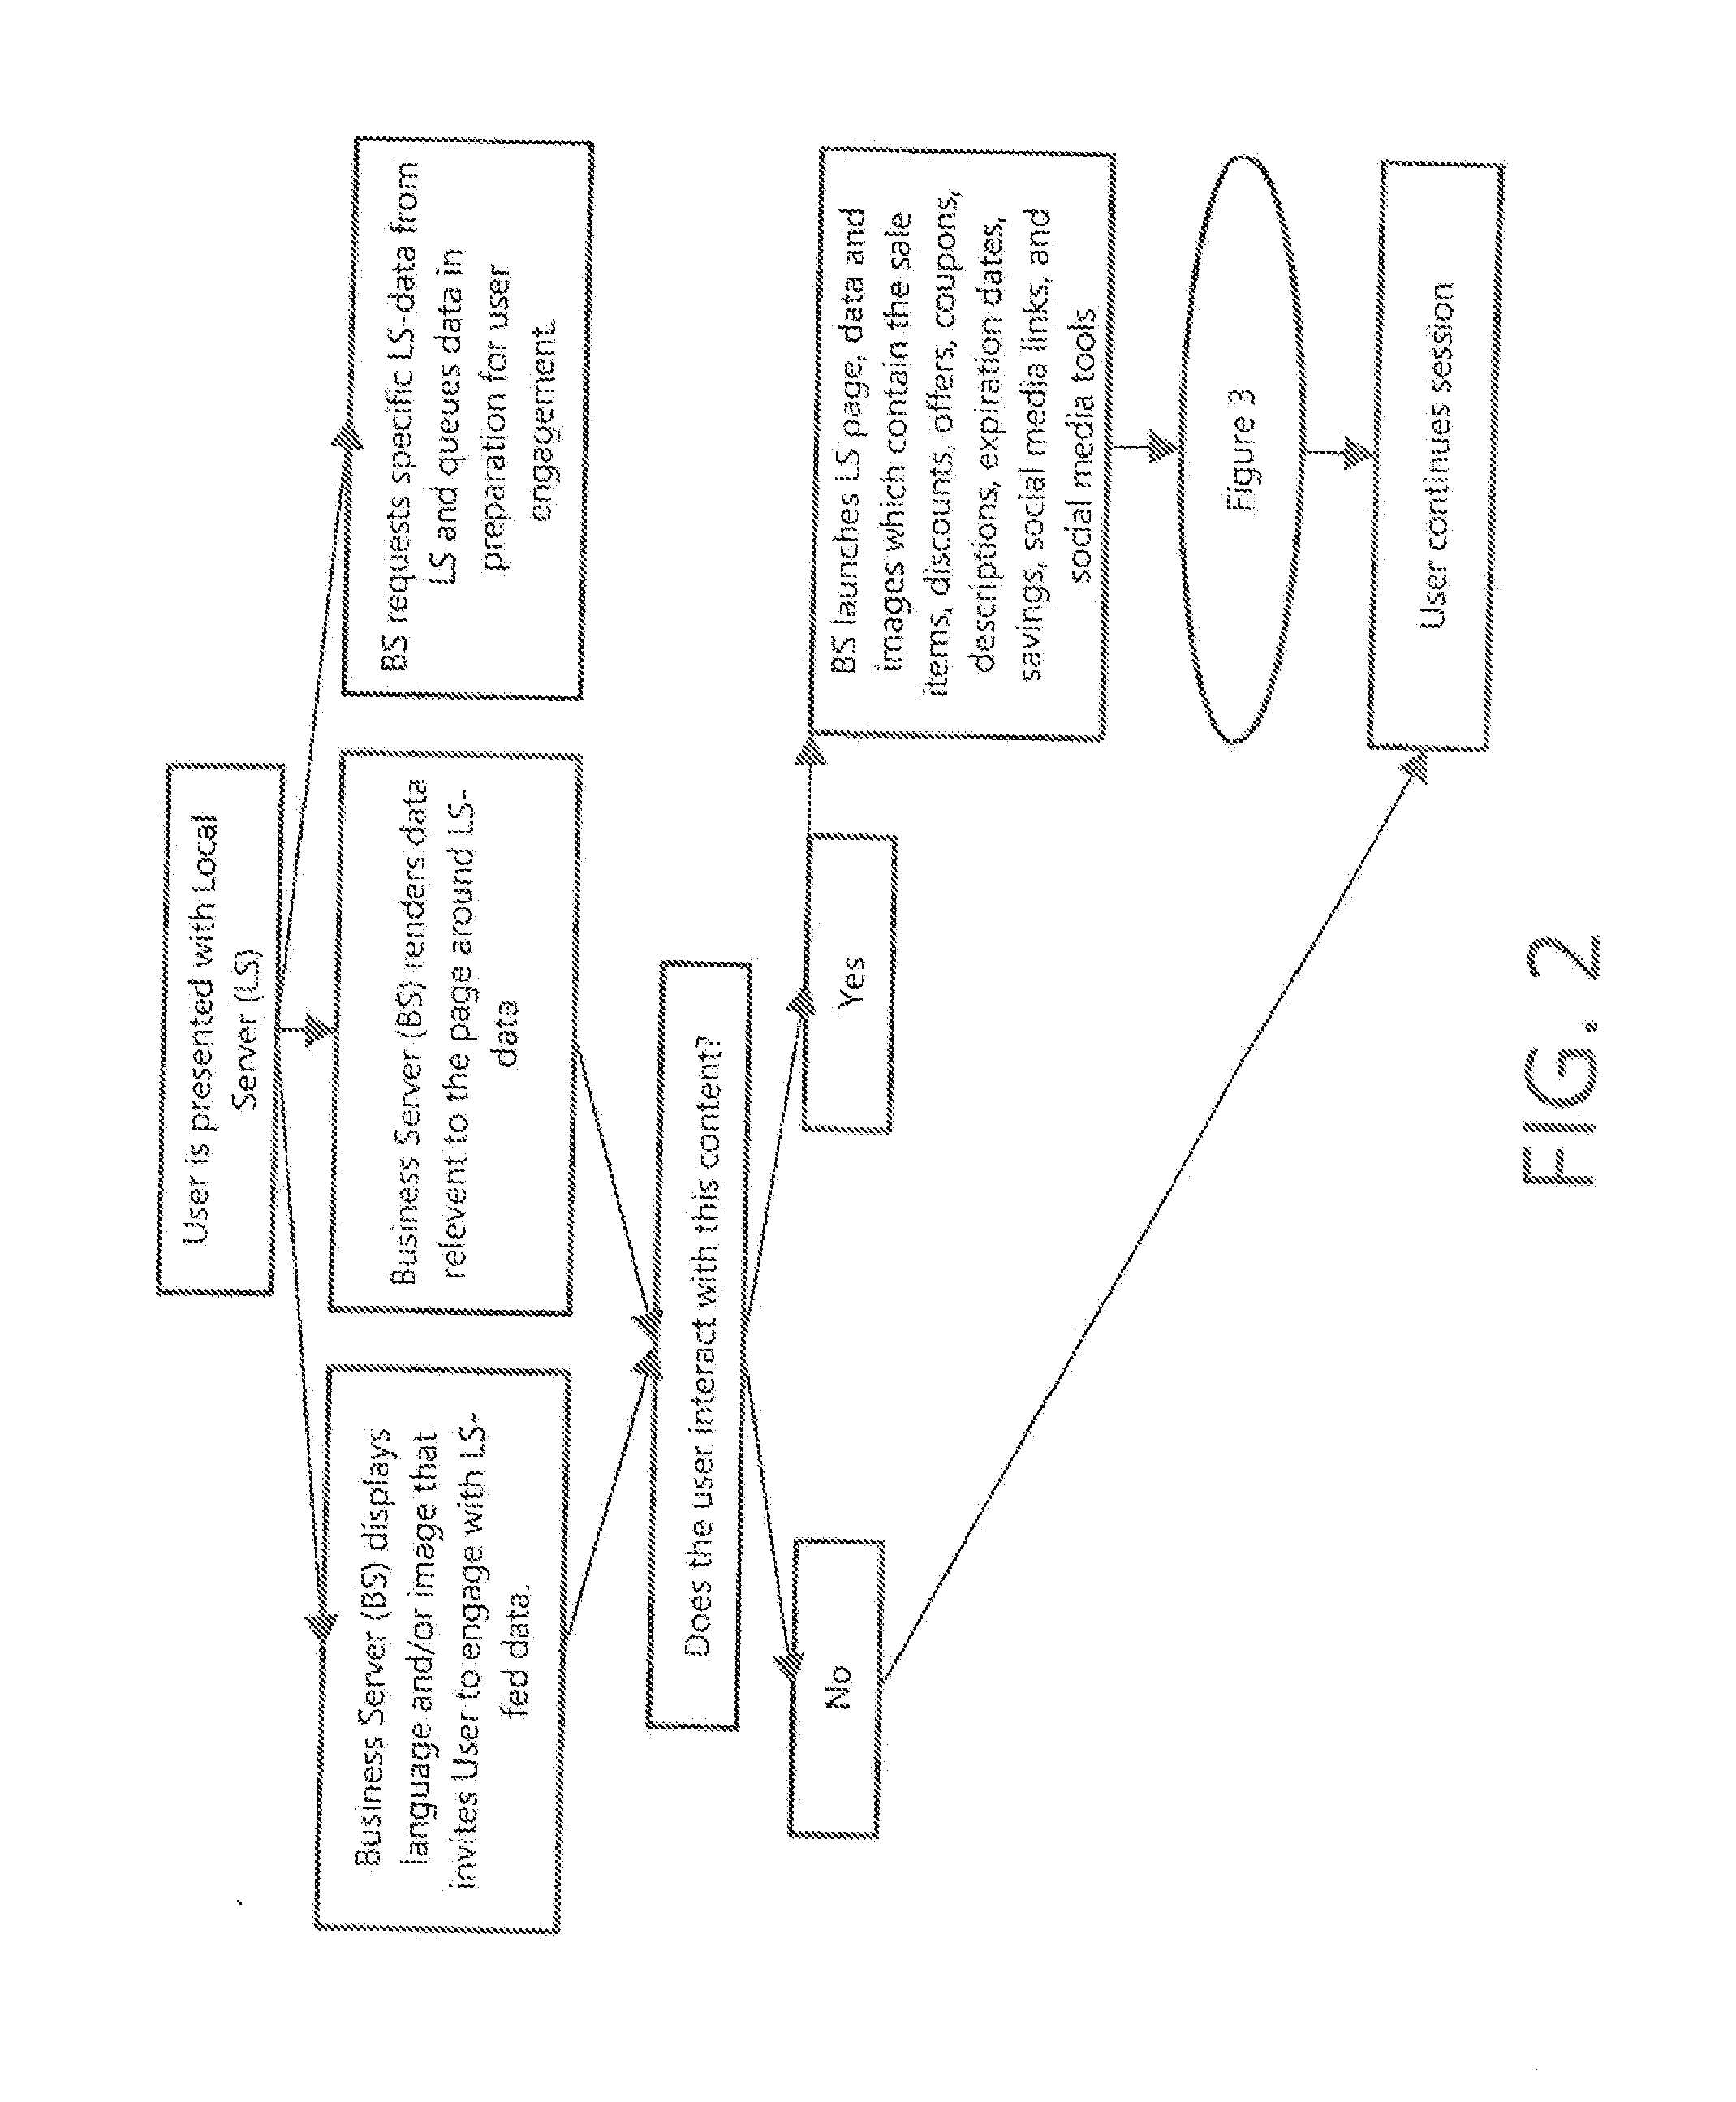 System and Method for Providing an Online Discount